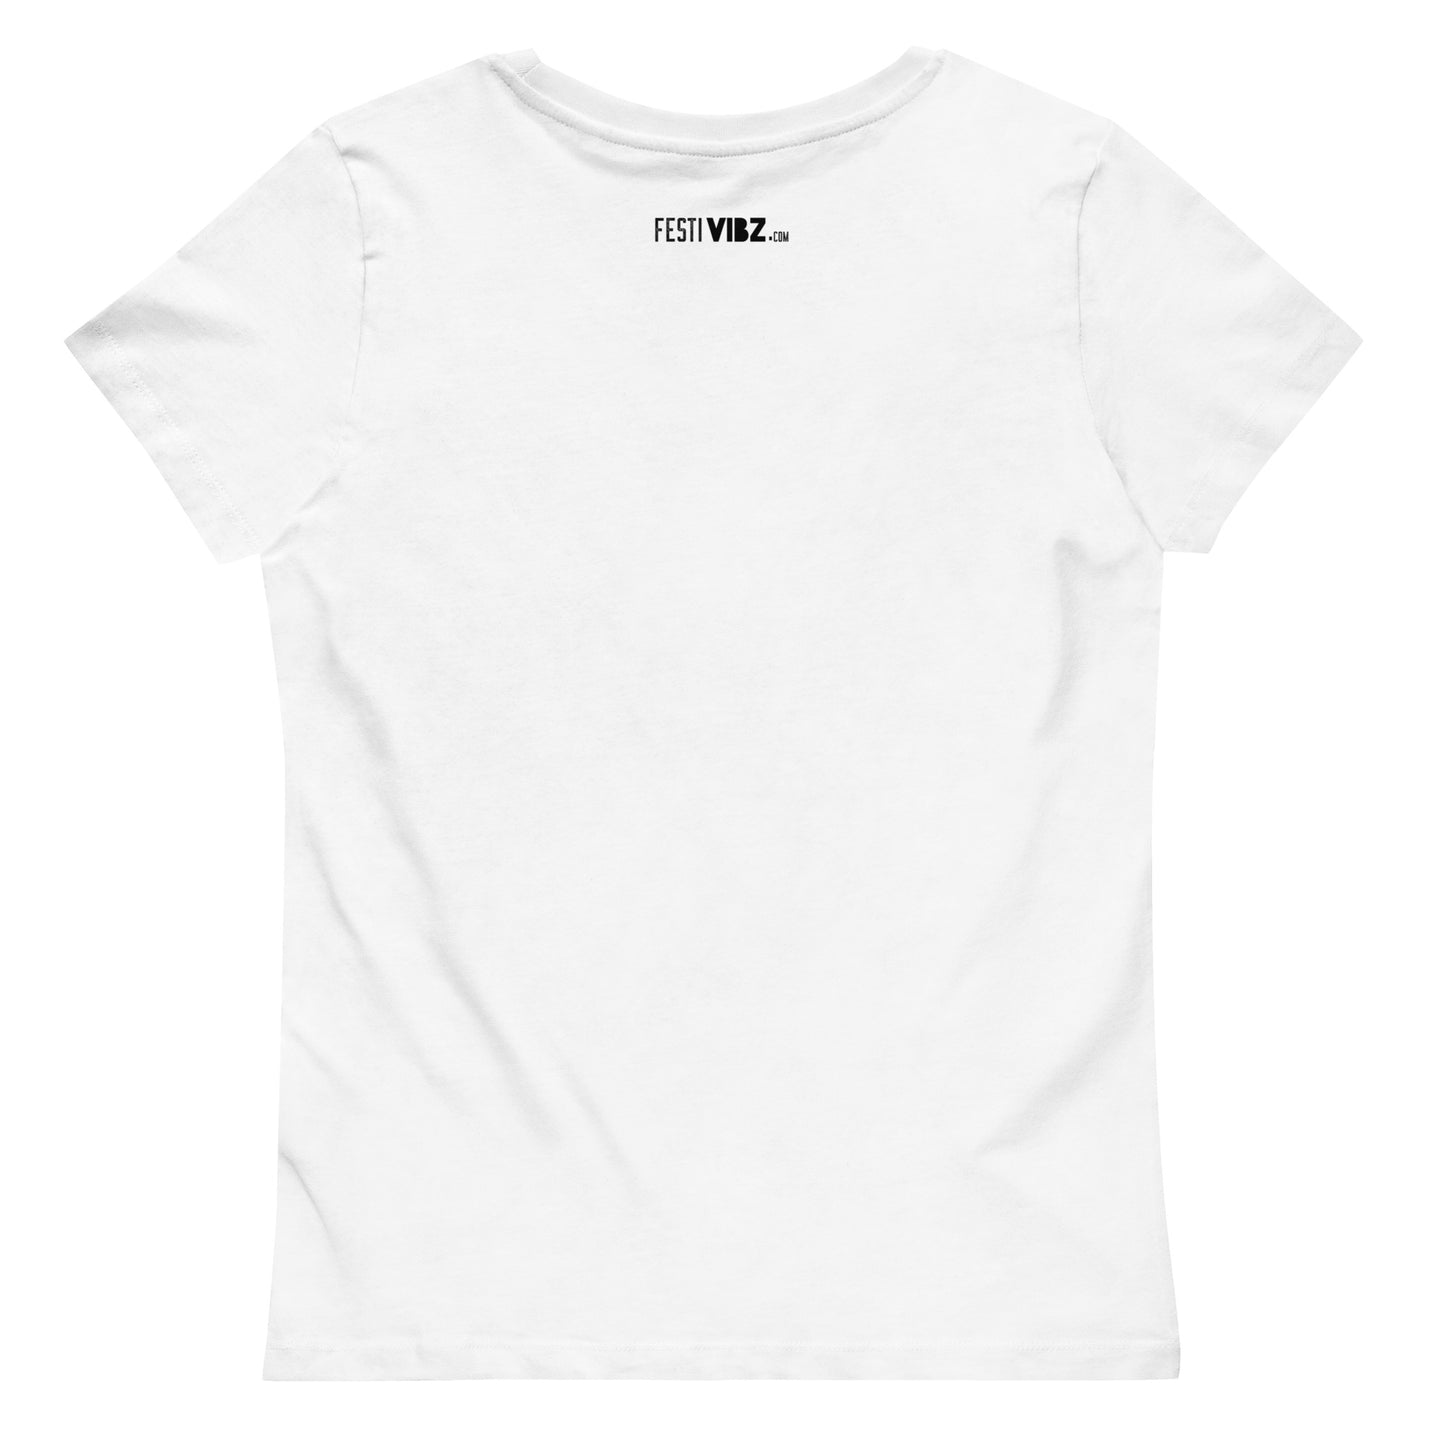 Trance Zaddy - Women's Fitted T-Shirt